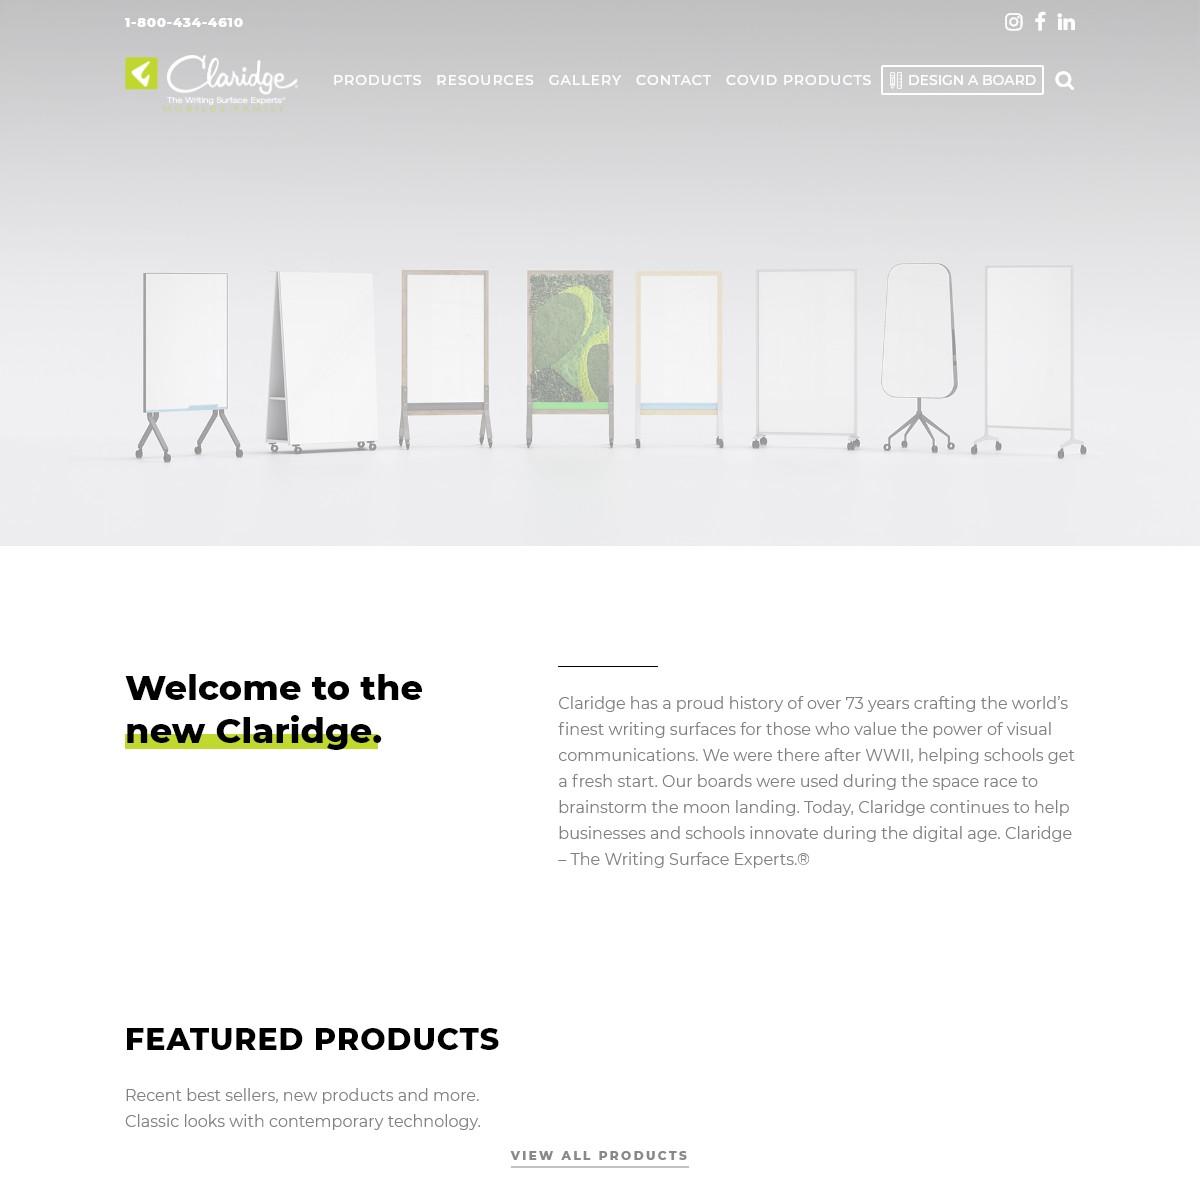 A complete backup of claridgeproducts.com